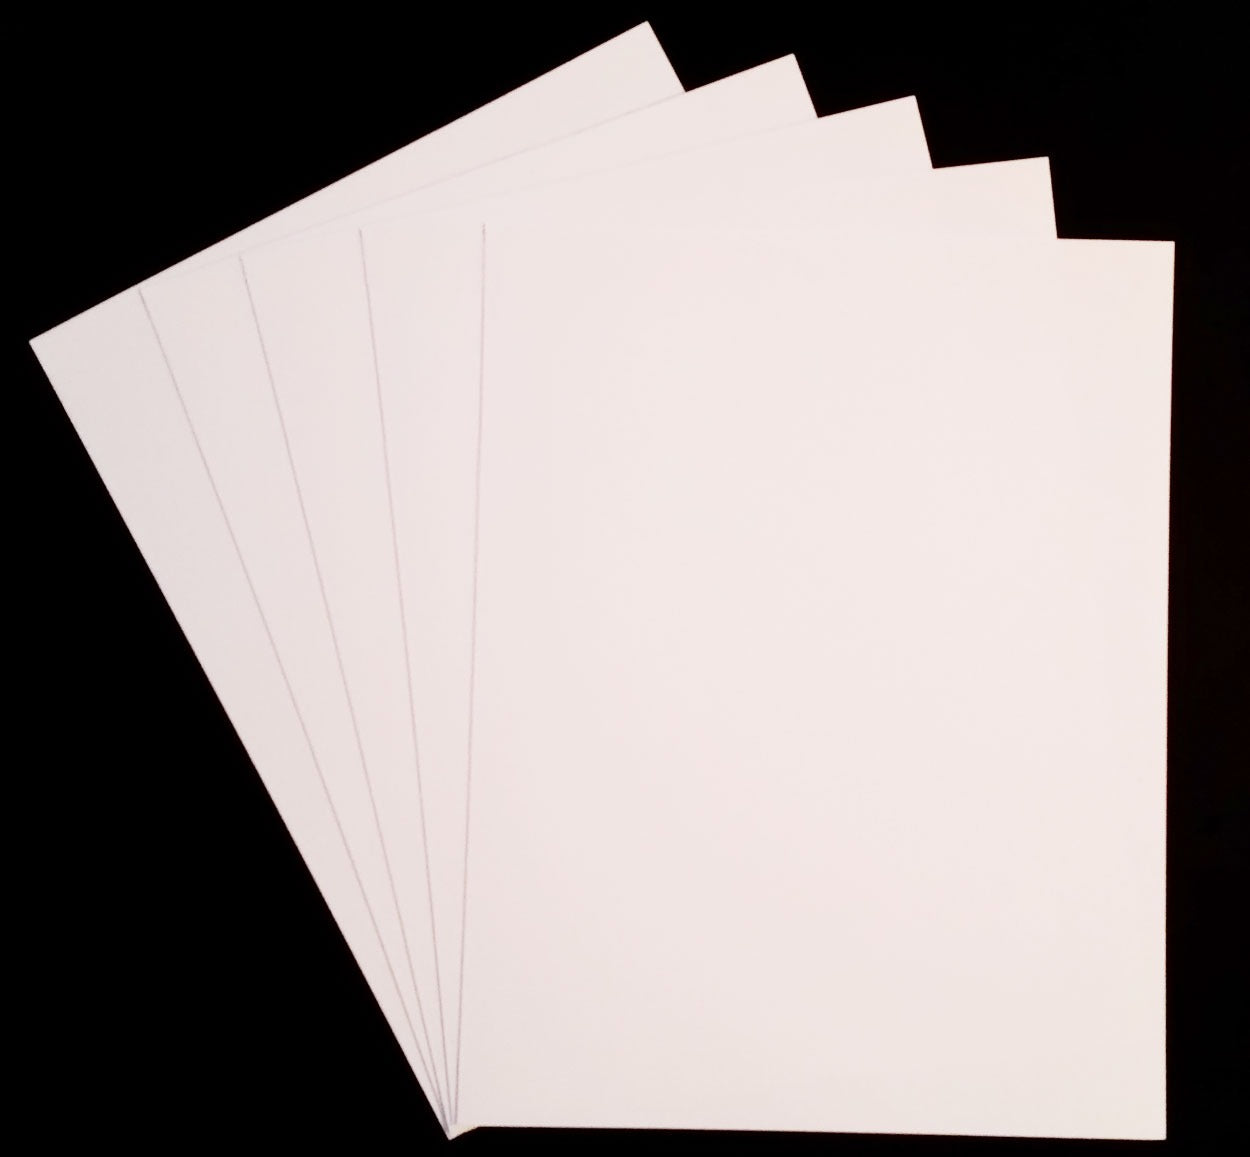 17 X 22, 50 sheets/box, Fine Art Dual-Sided Paper, 210 gsm